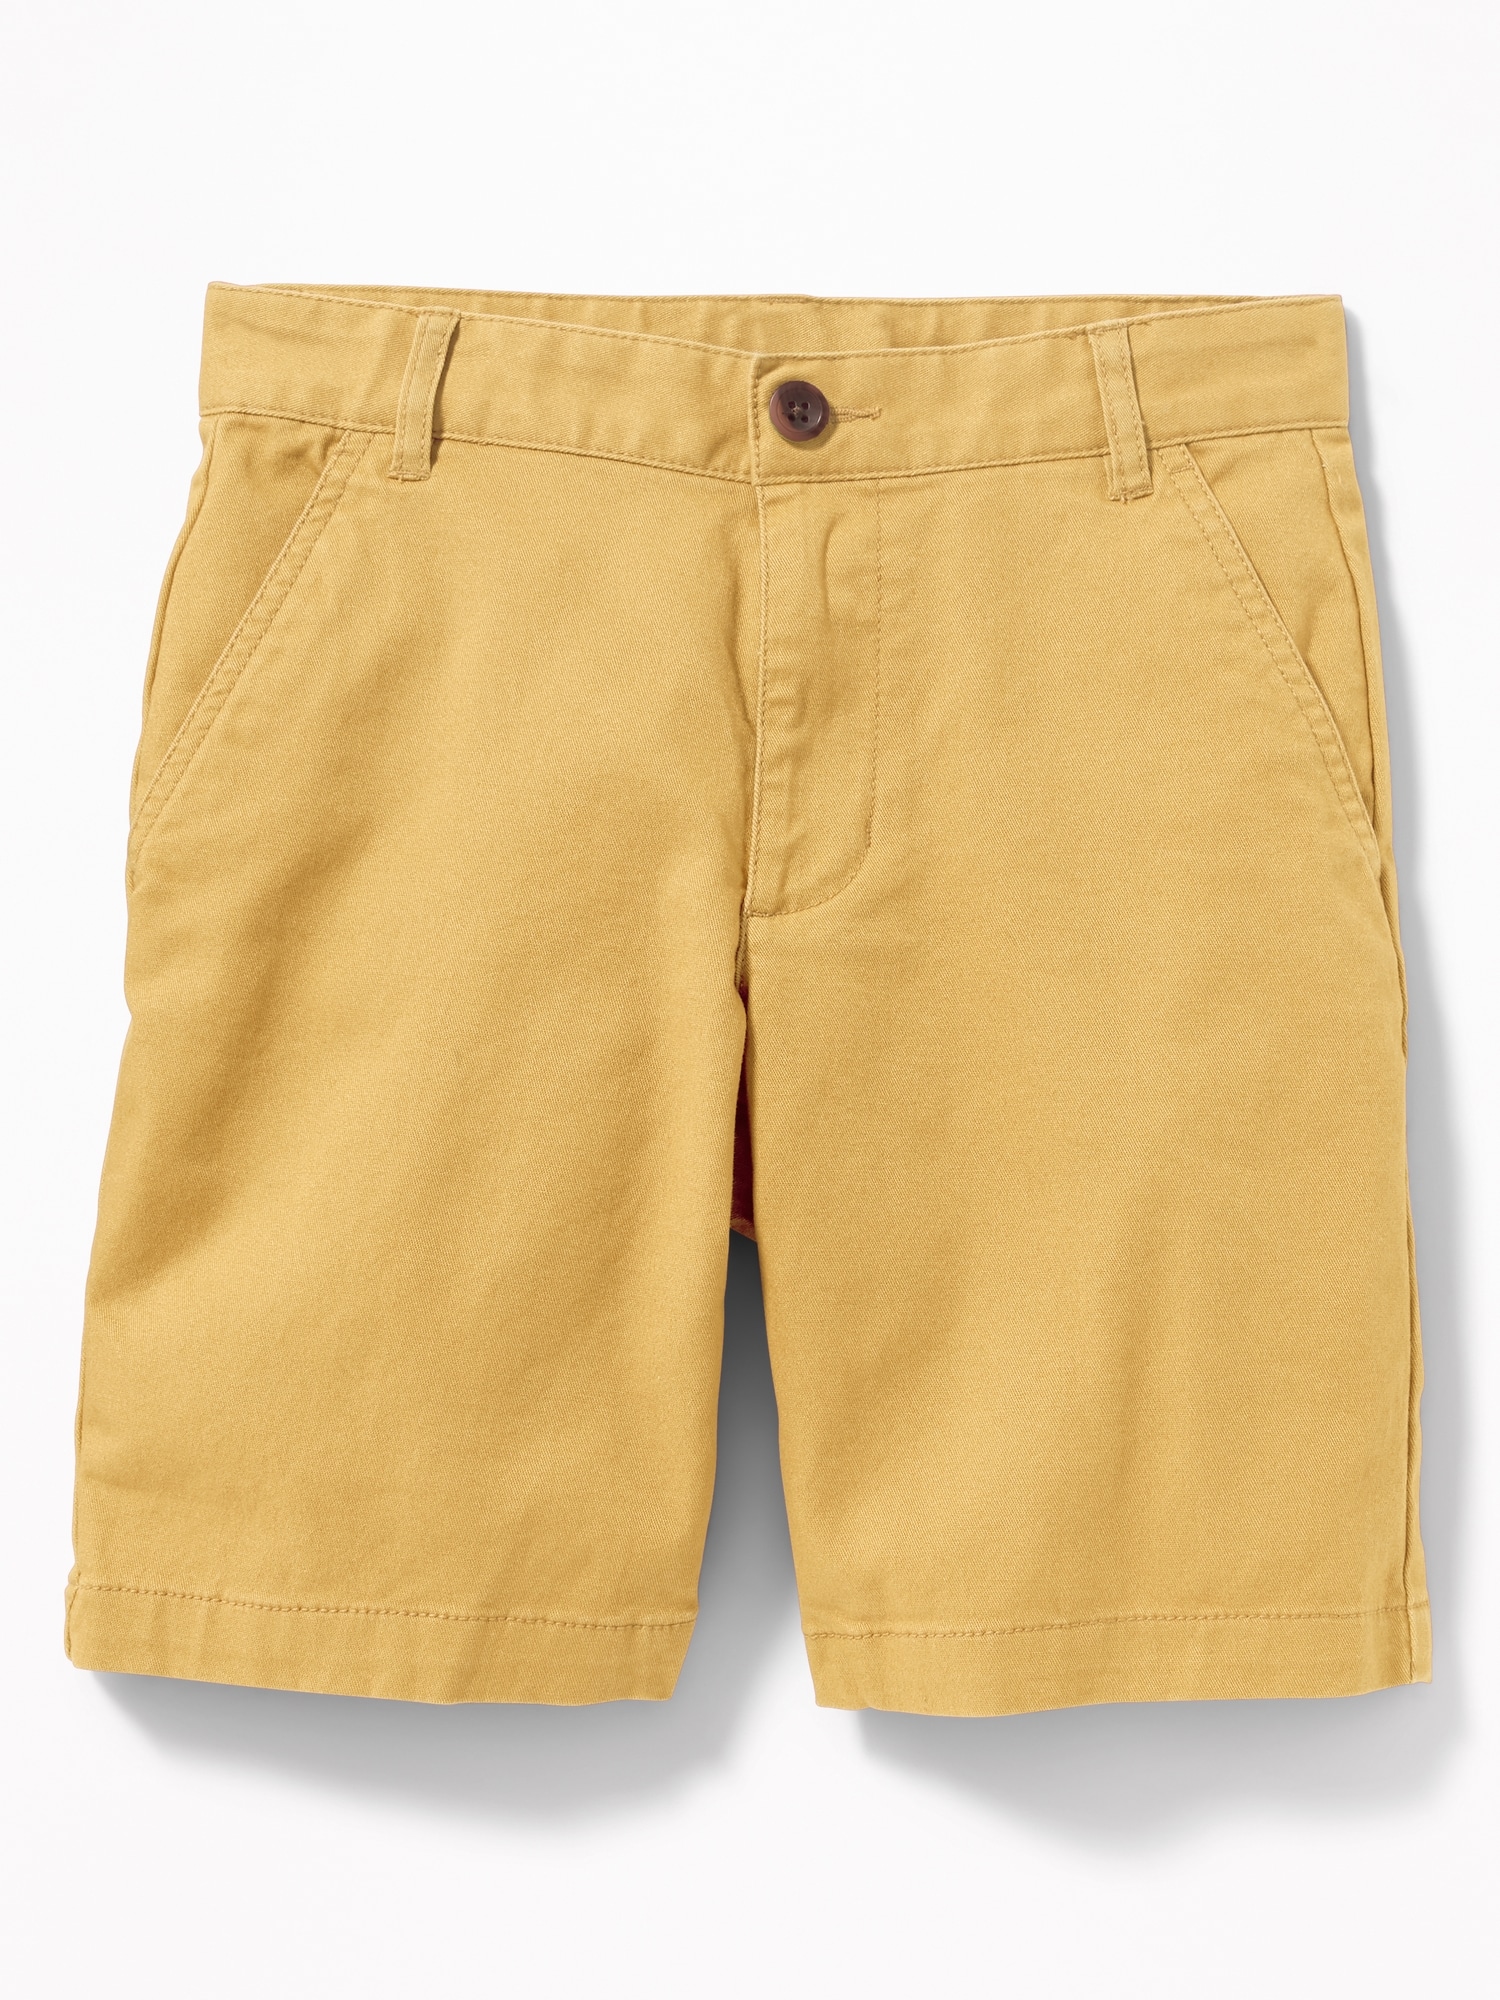 Straight Built-In Flex Twill Shorts for Boys | Old Navy